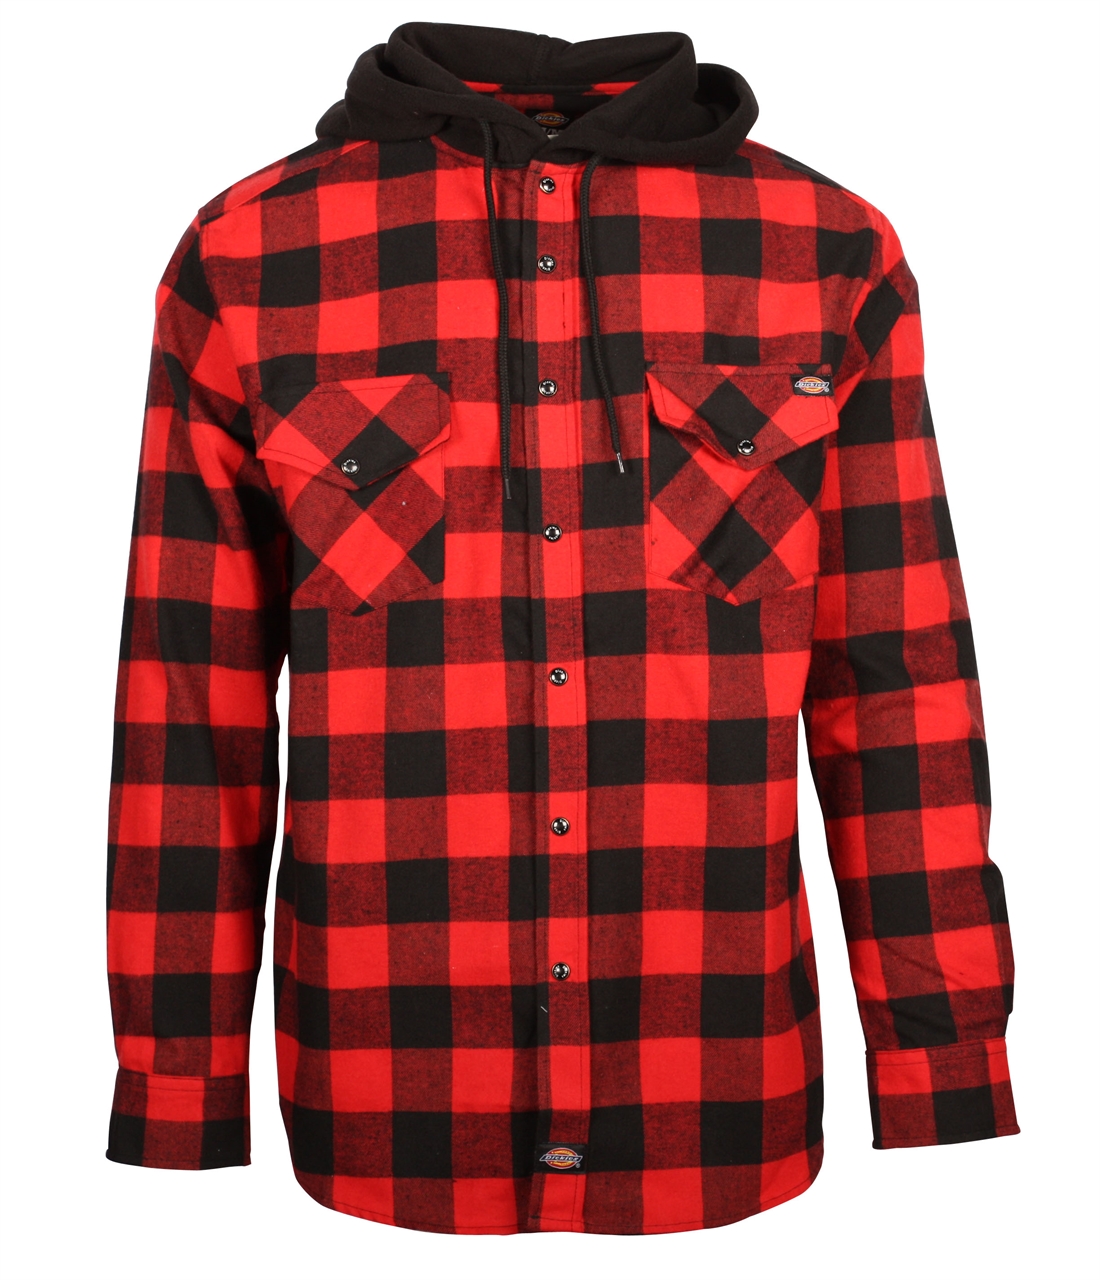 flannel jacket with hoodie